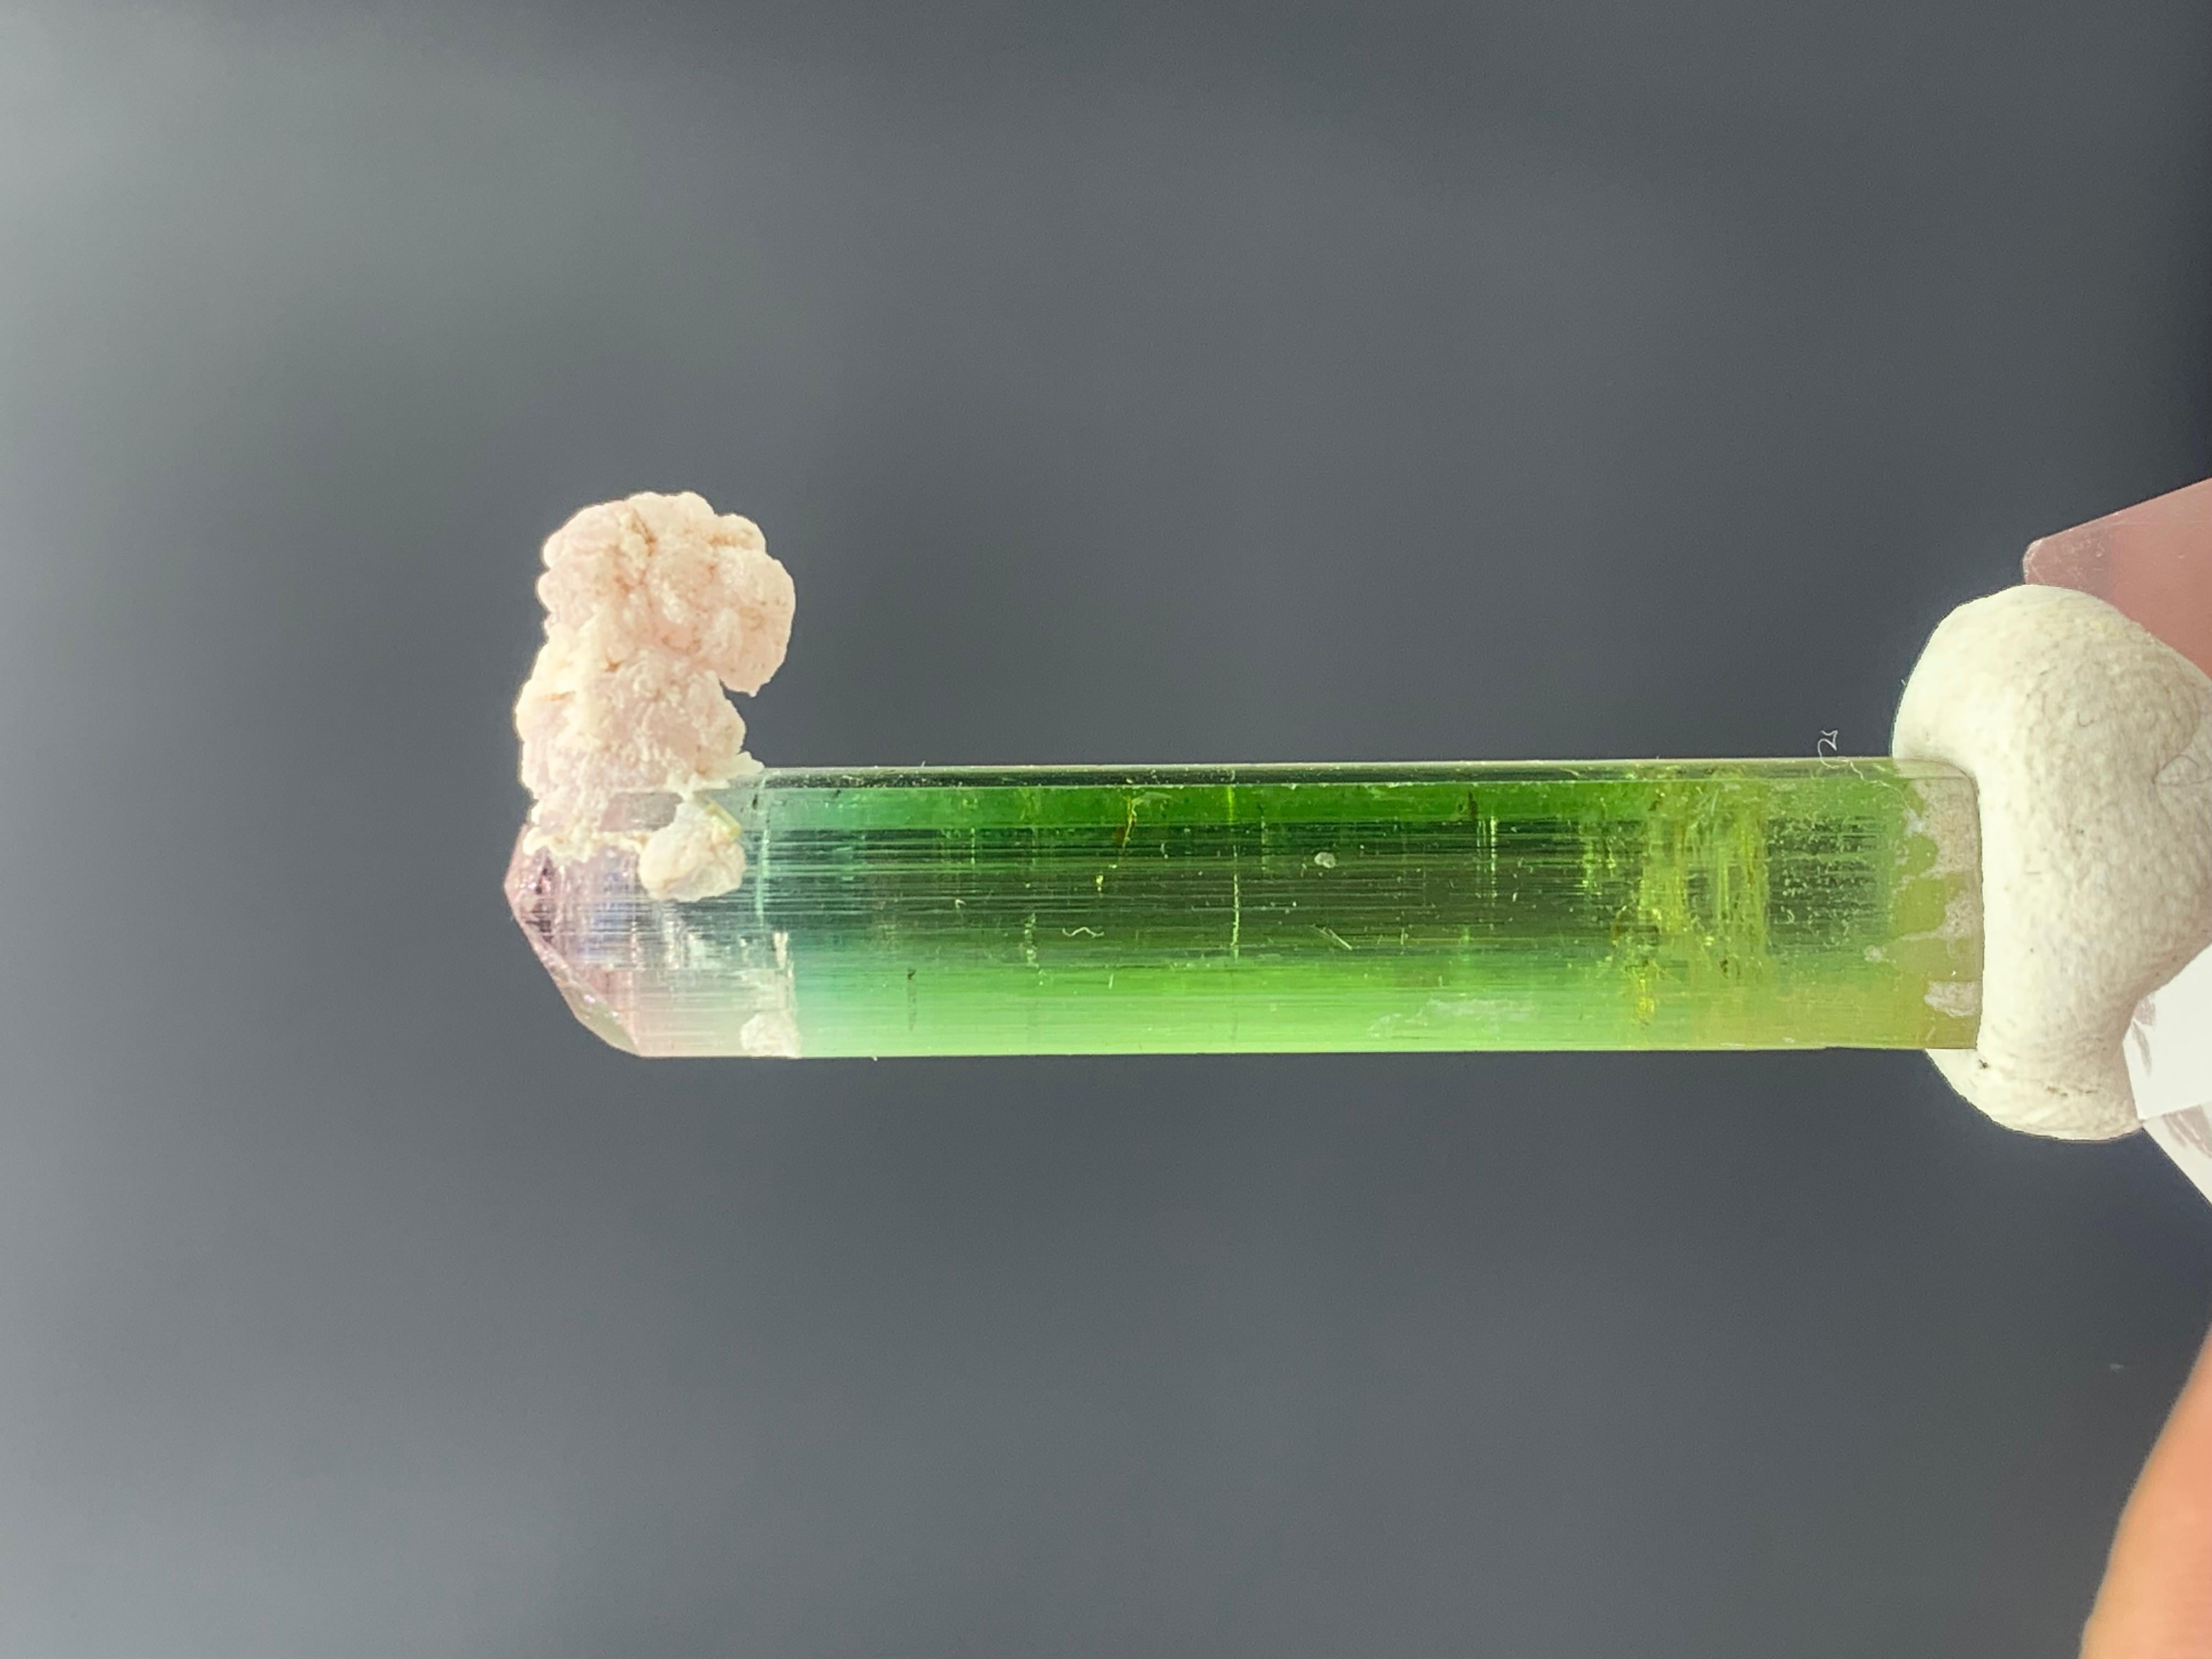 Lovely Bi Color Tourmaline Crystal From Nuristan, Afghanistan
WEIGHT: 31.25 Carat
DIMENSIONS: 4.1 x 0.8 x 0.8 Cm
ORIGIN: Nuristan, Afghanistan
TREATMENT: None

Tourmaline is an extremely popular gemstone; the name Tourmaline is derived from